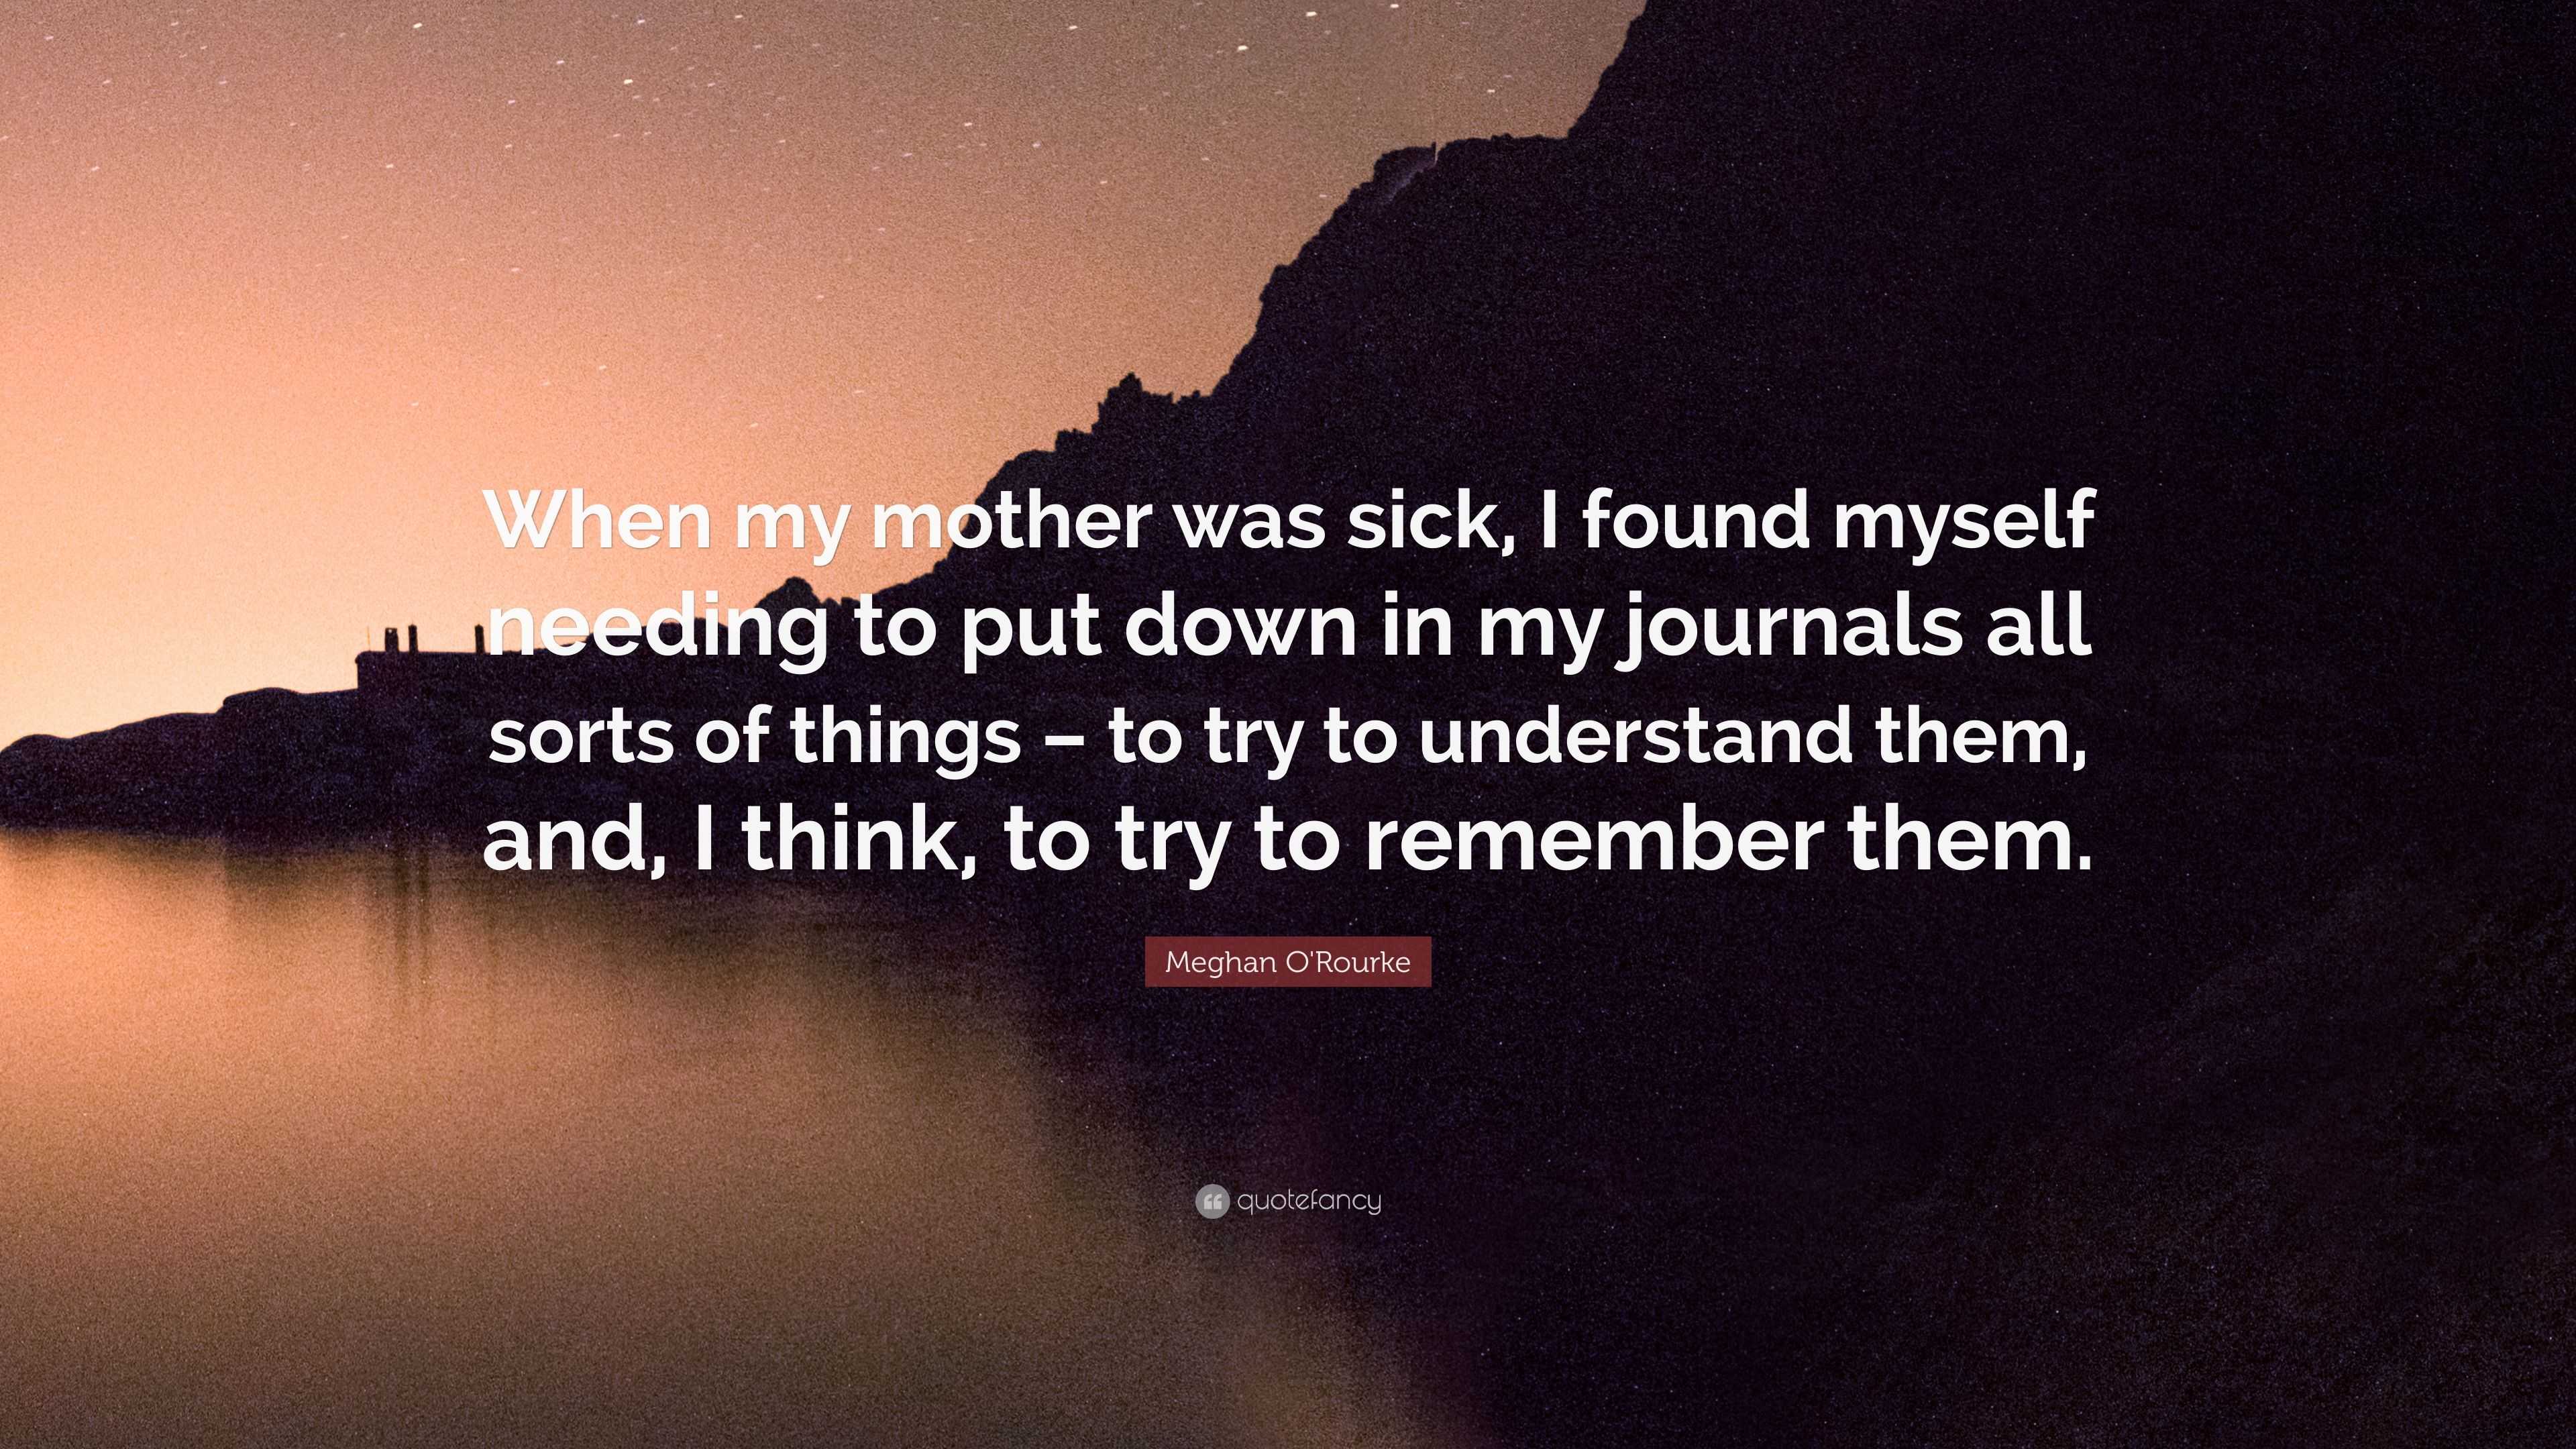 essay on when my mother was sick